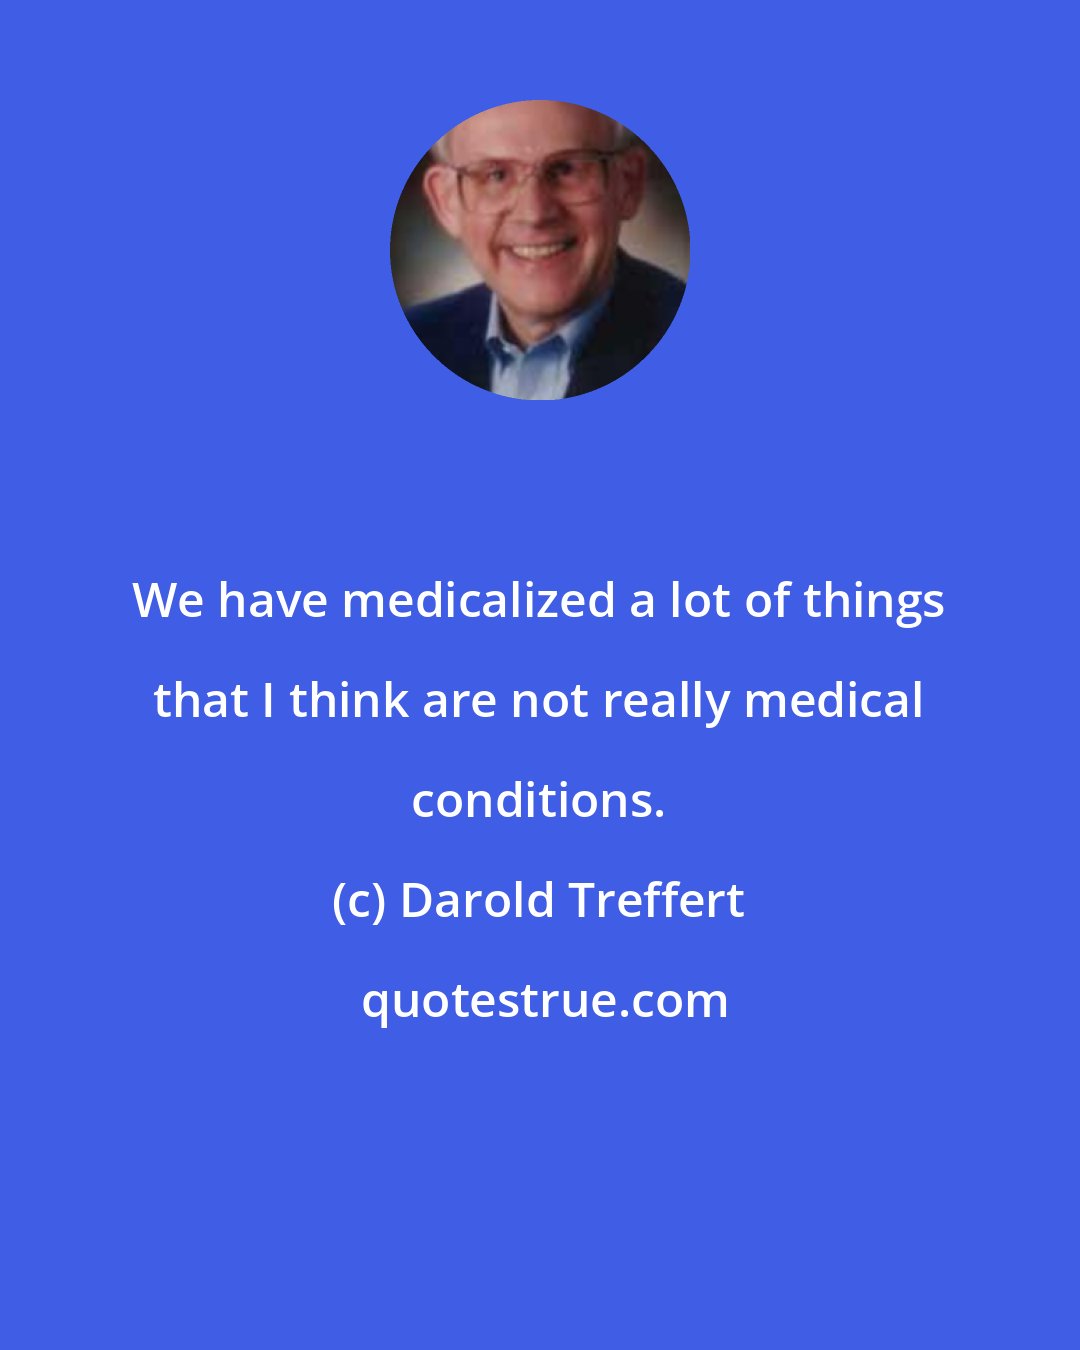 Darold Treffert: We have medicalized a lot of things that I think are not really medical conditions.